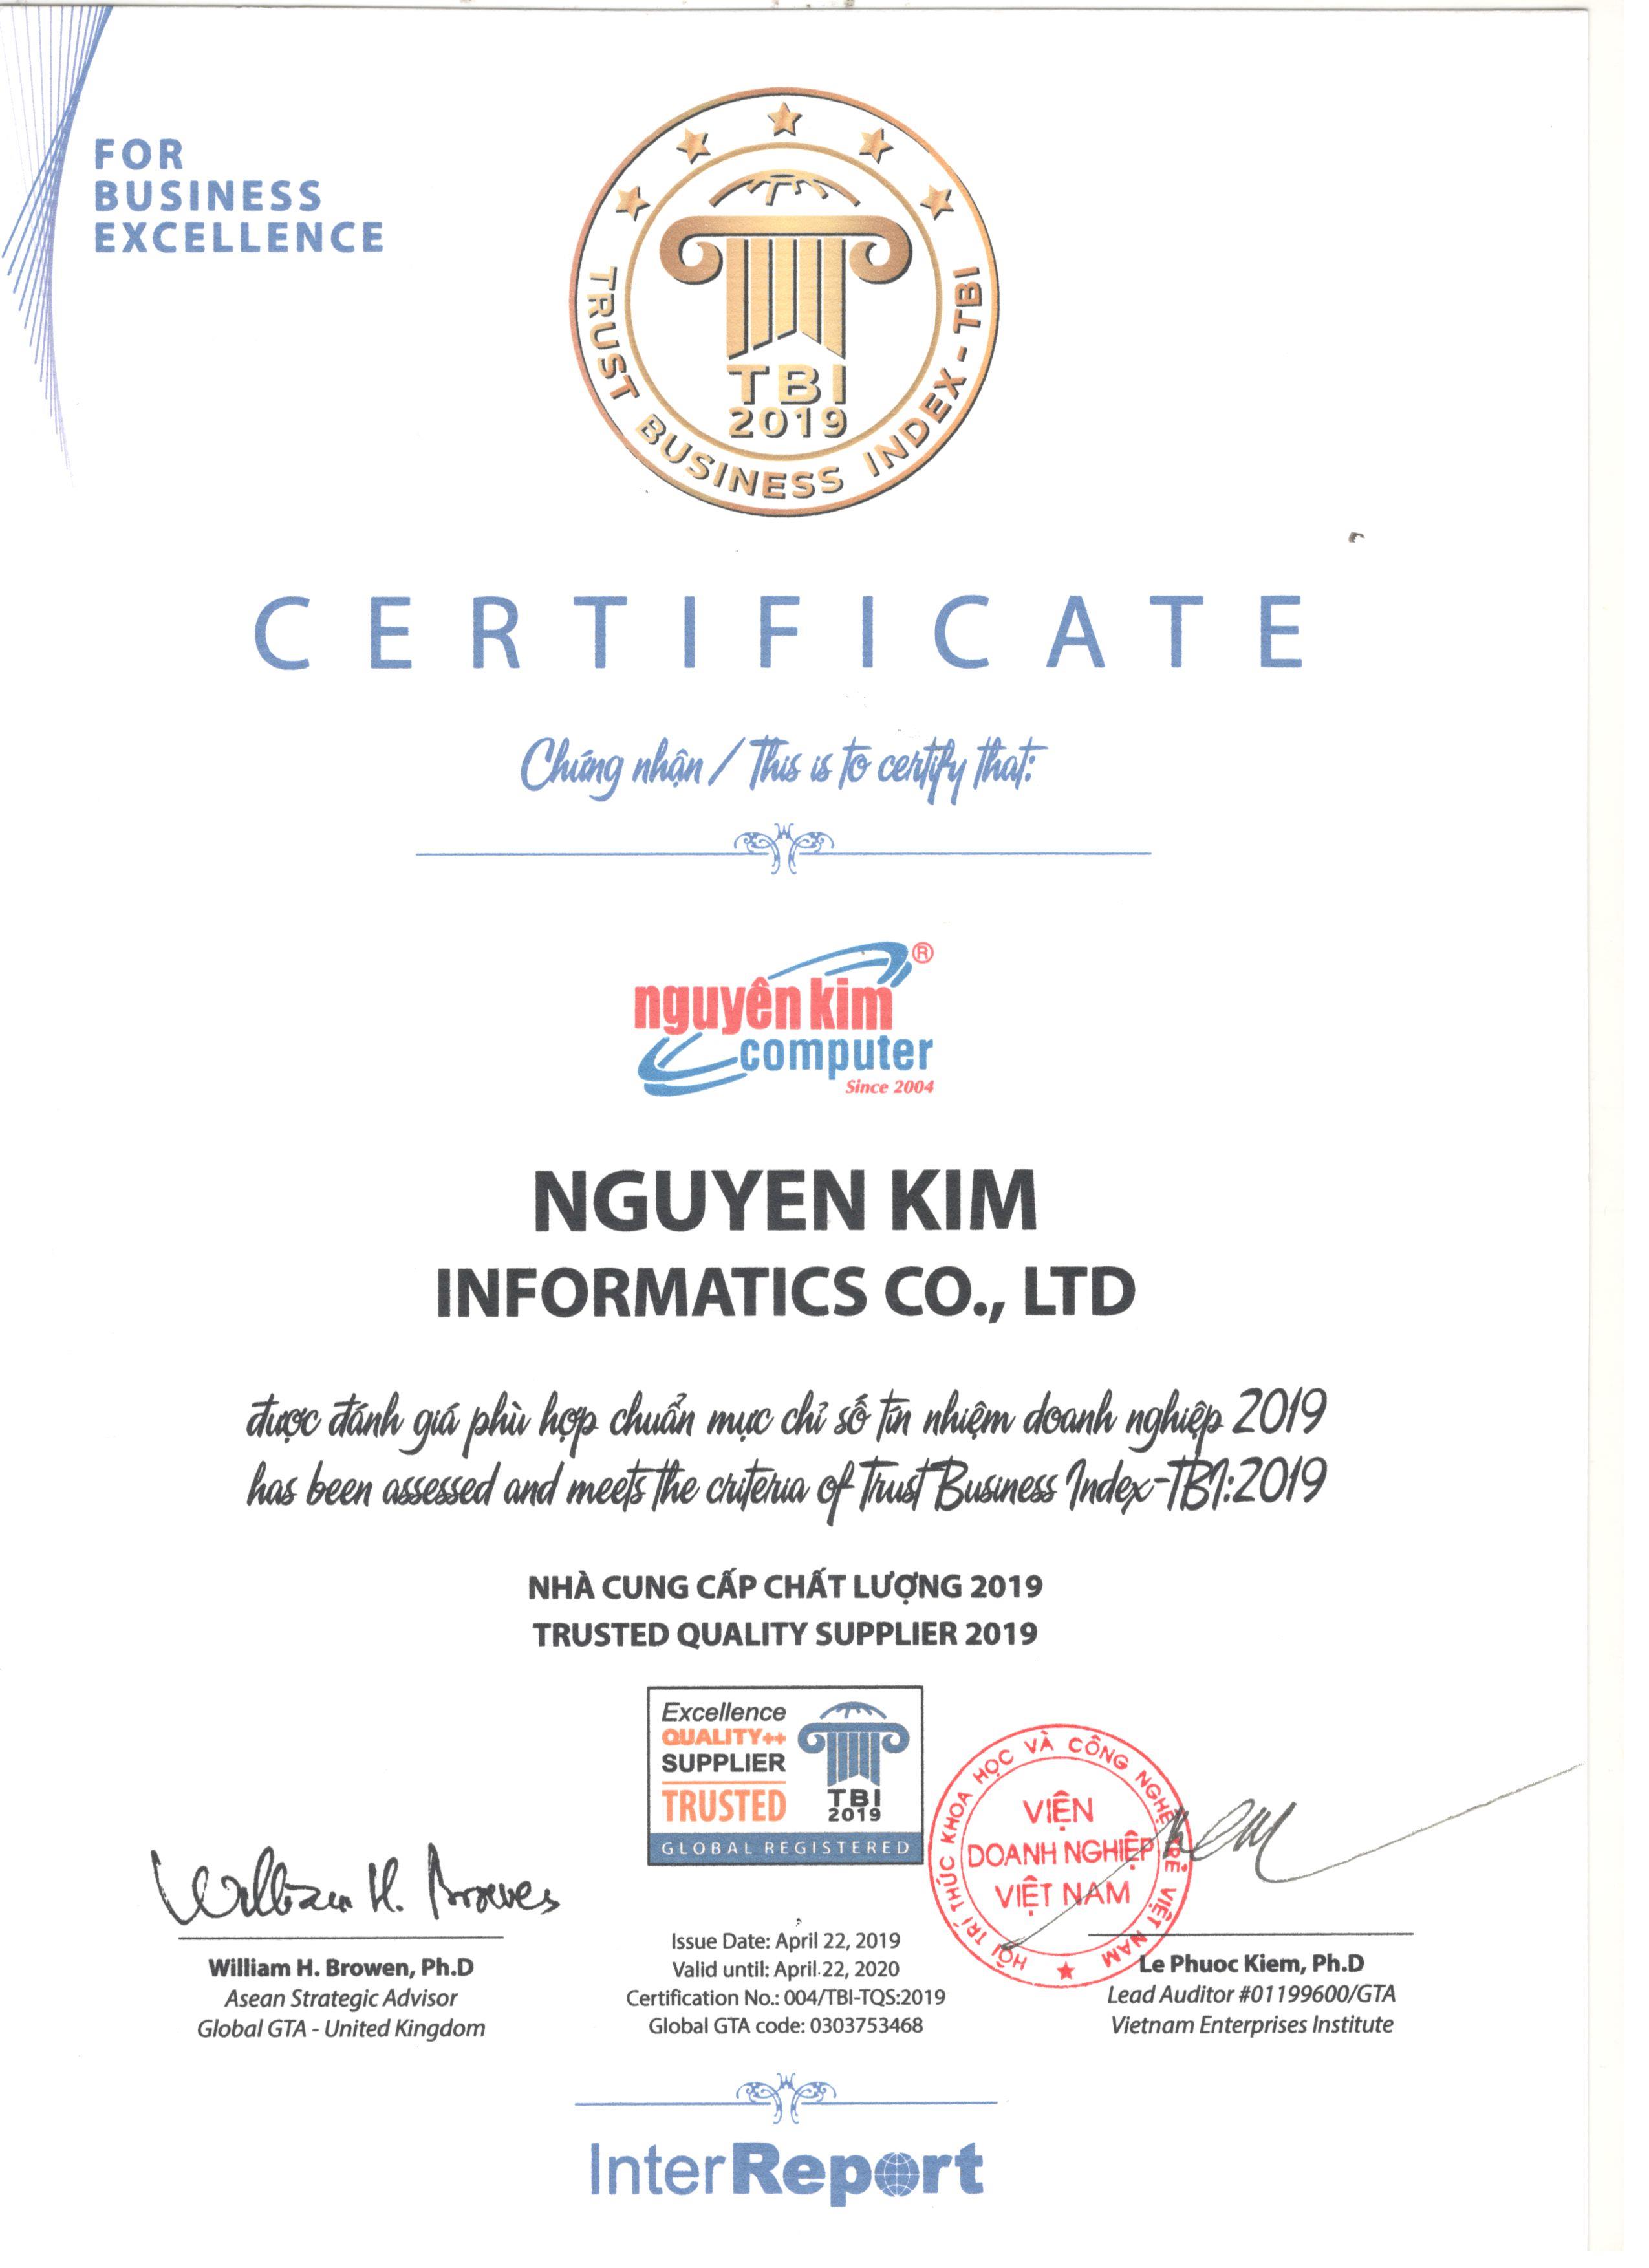 Chứng nhận Certificate Trusted Quality Supplier 2019